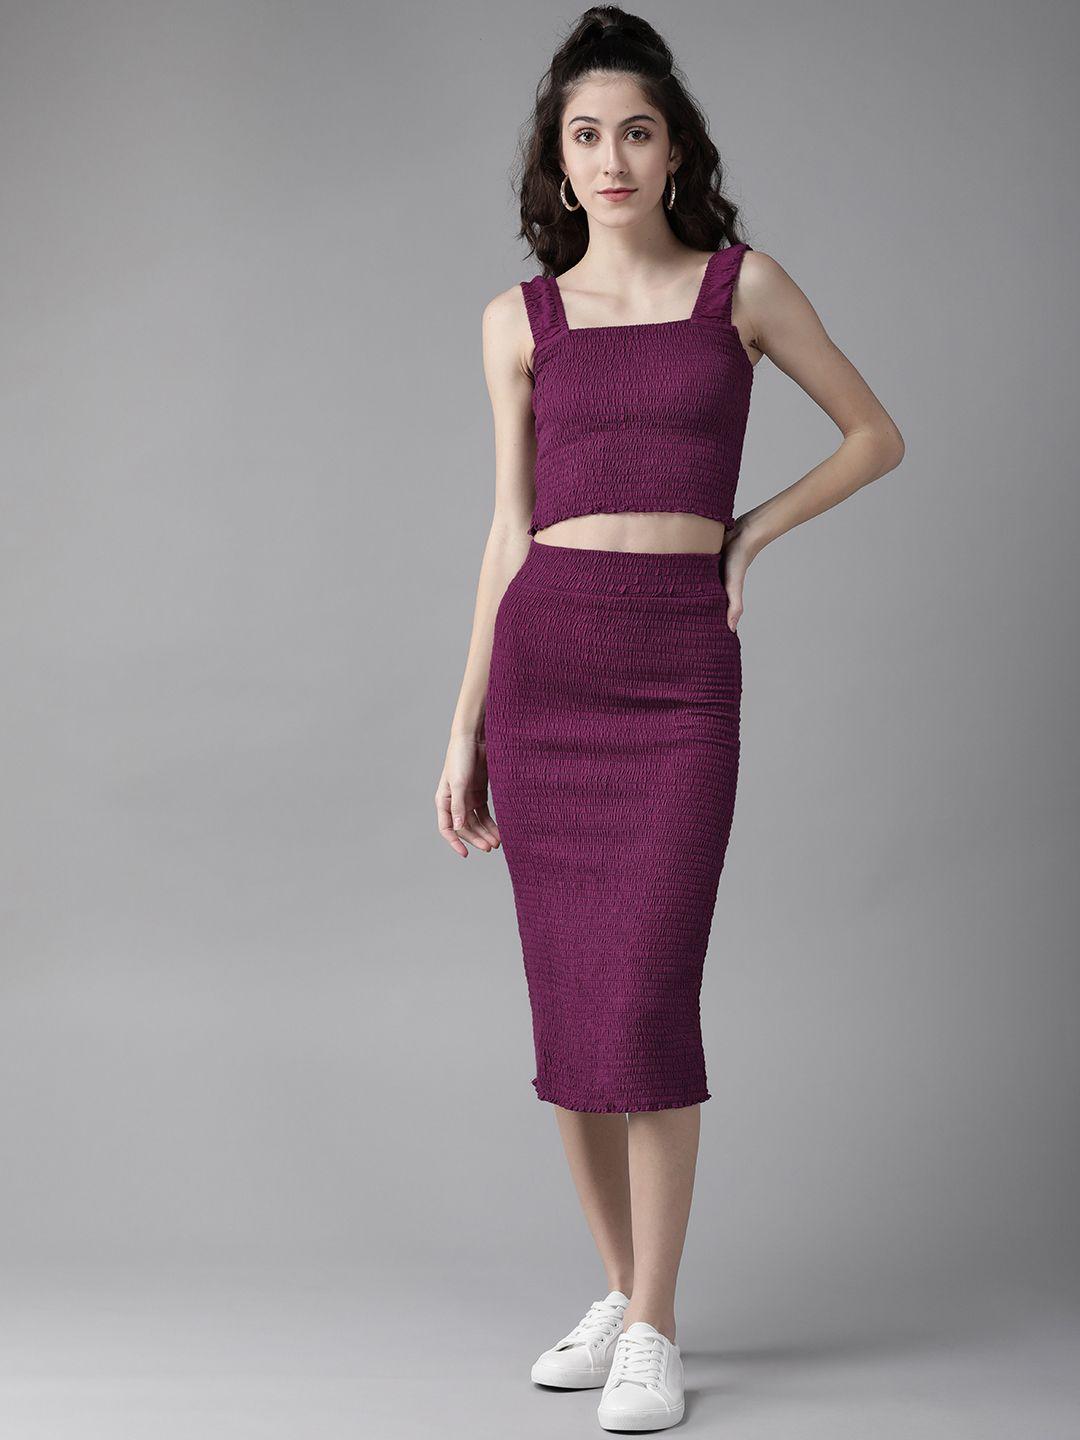 the dry state women purple smocked top with skirt